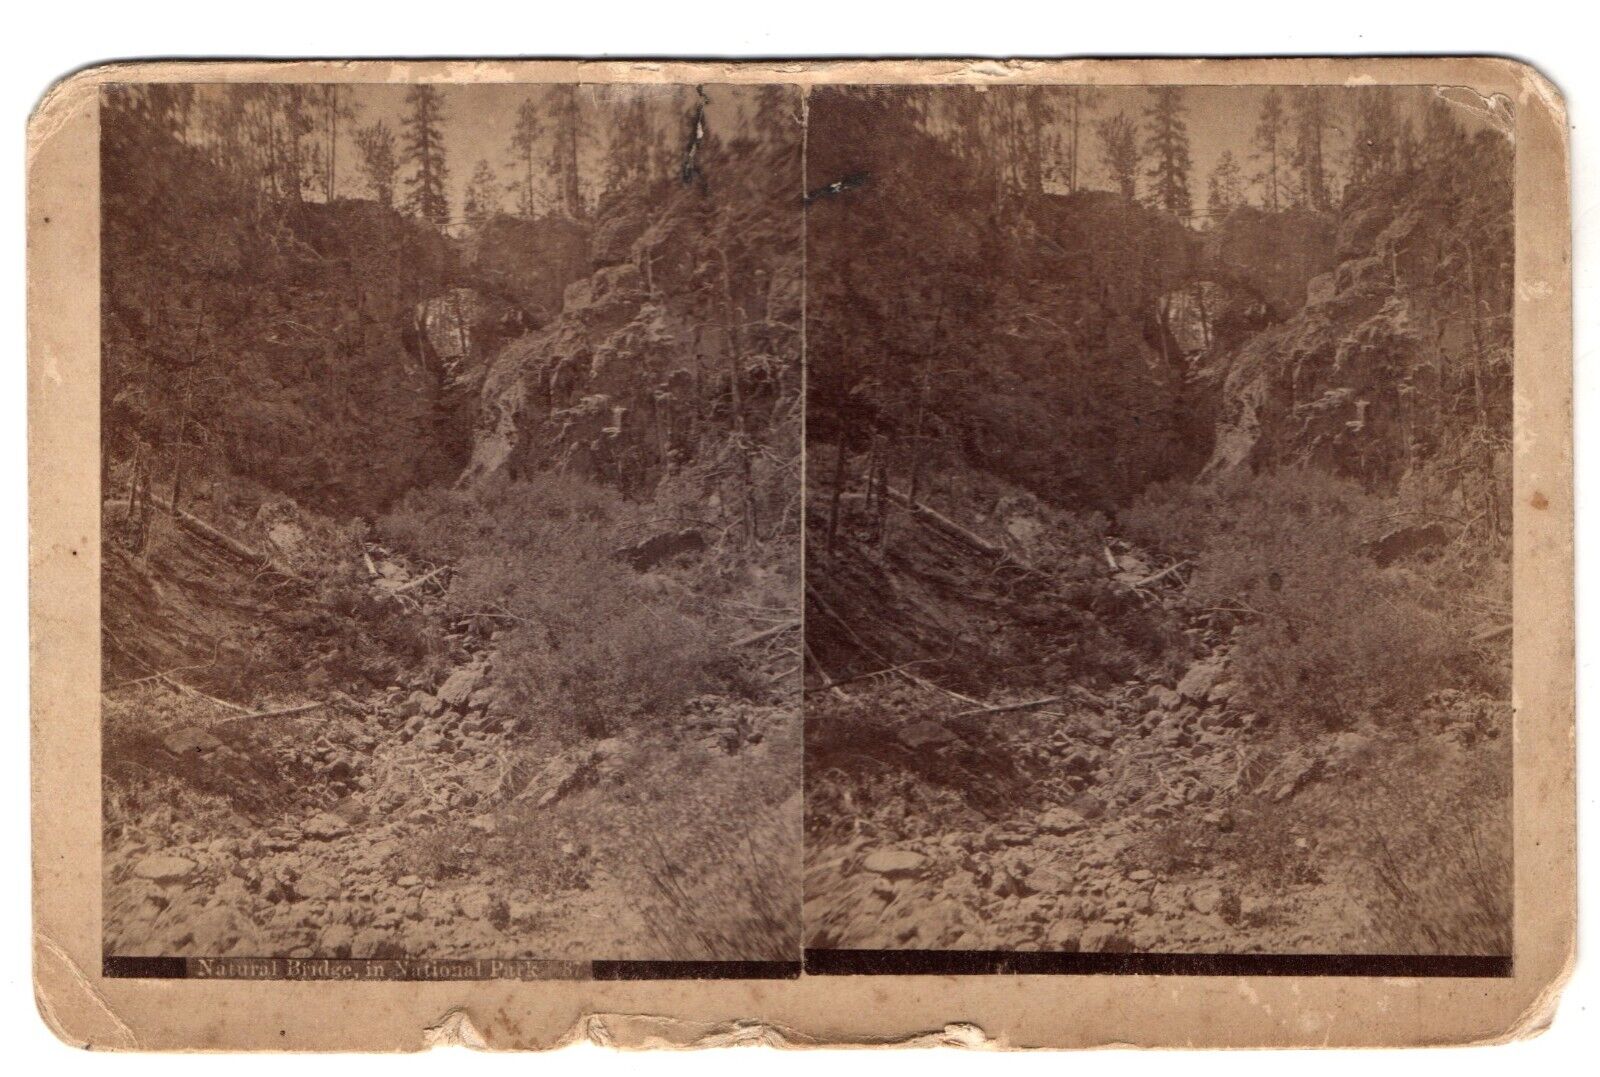 Rare stereoview photo NATURAL BRIDGE in YELLOWSTONE NATIONAL PARK large 1880s WY